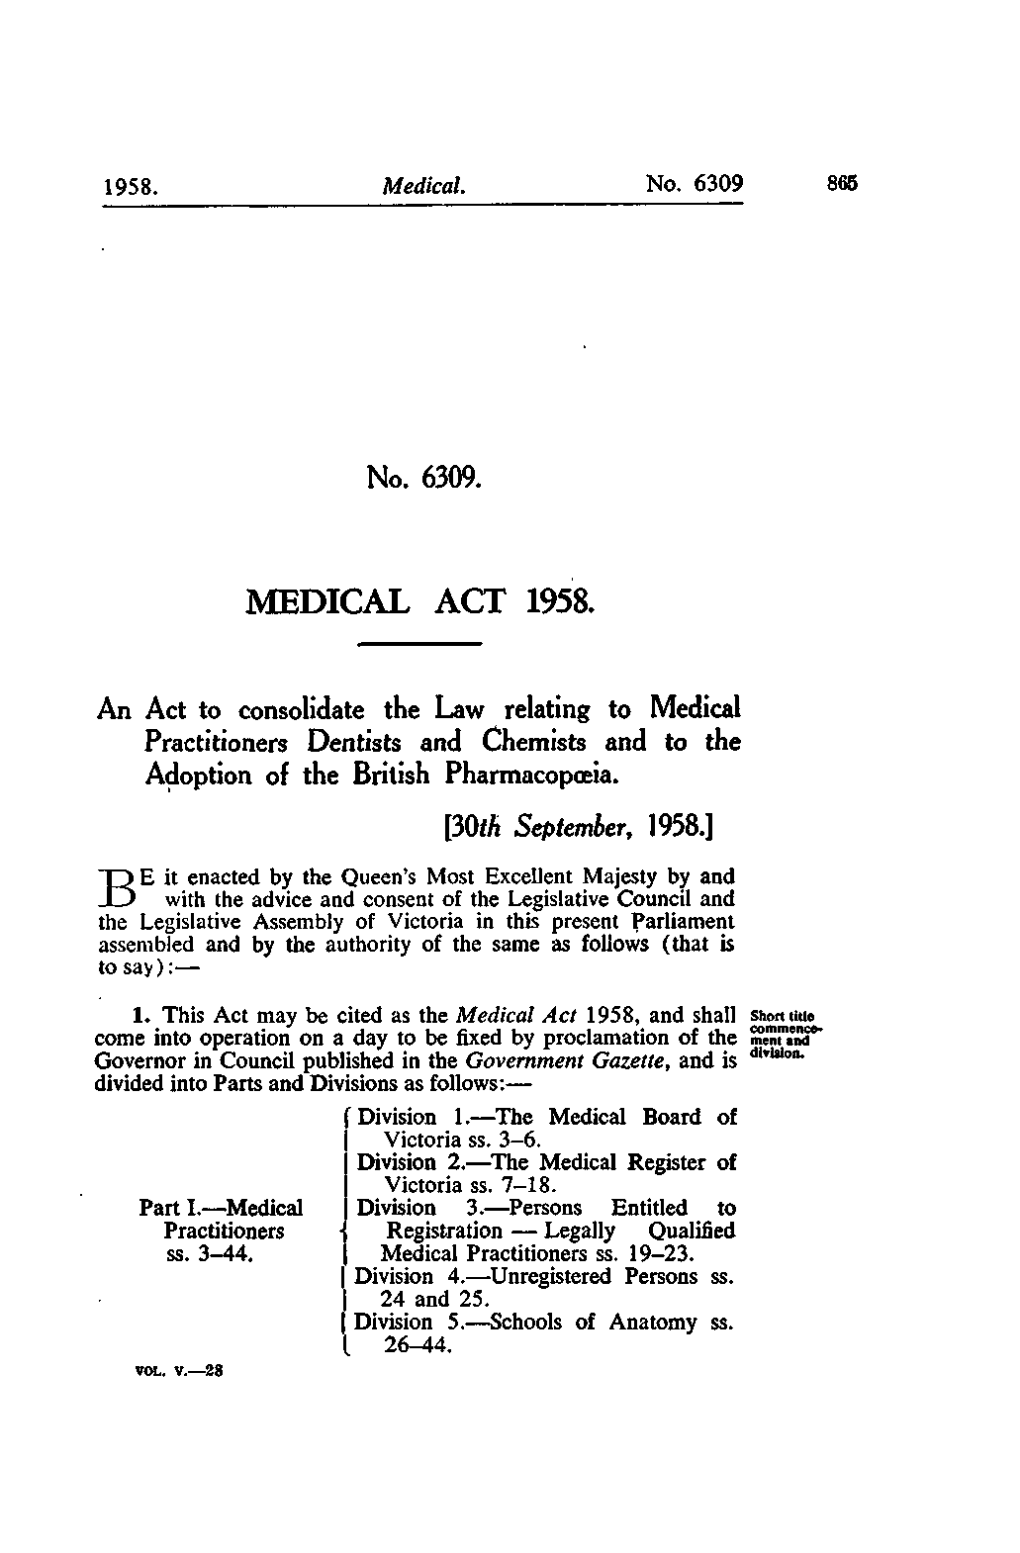 No. 6309. MEDICAL ACT 1958. an Act to Consolidate the Law Relating To